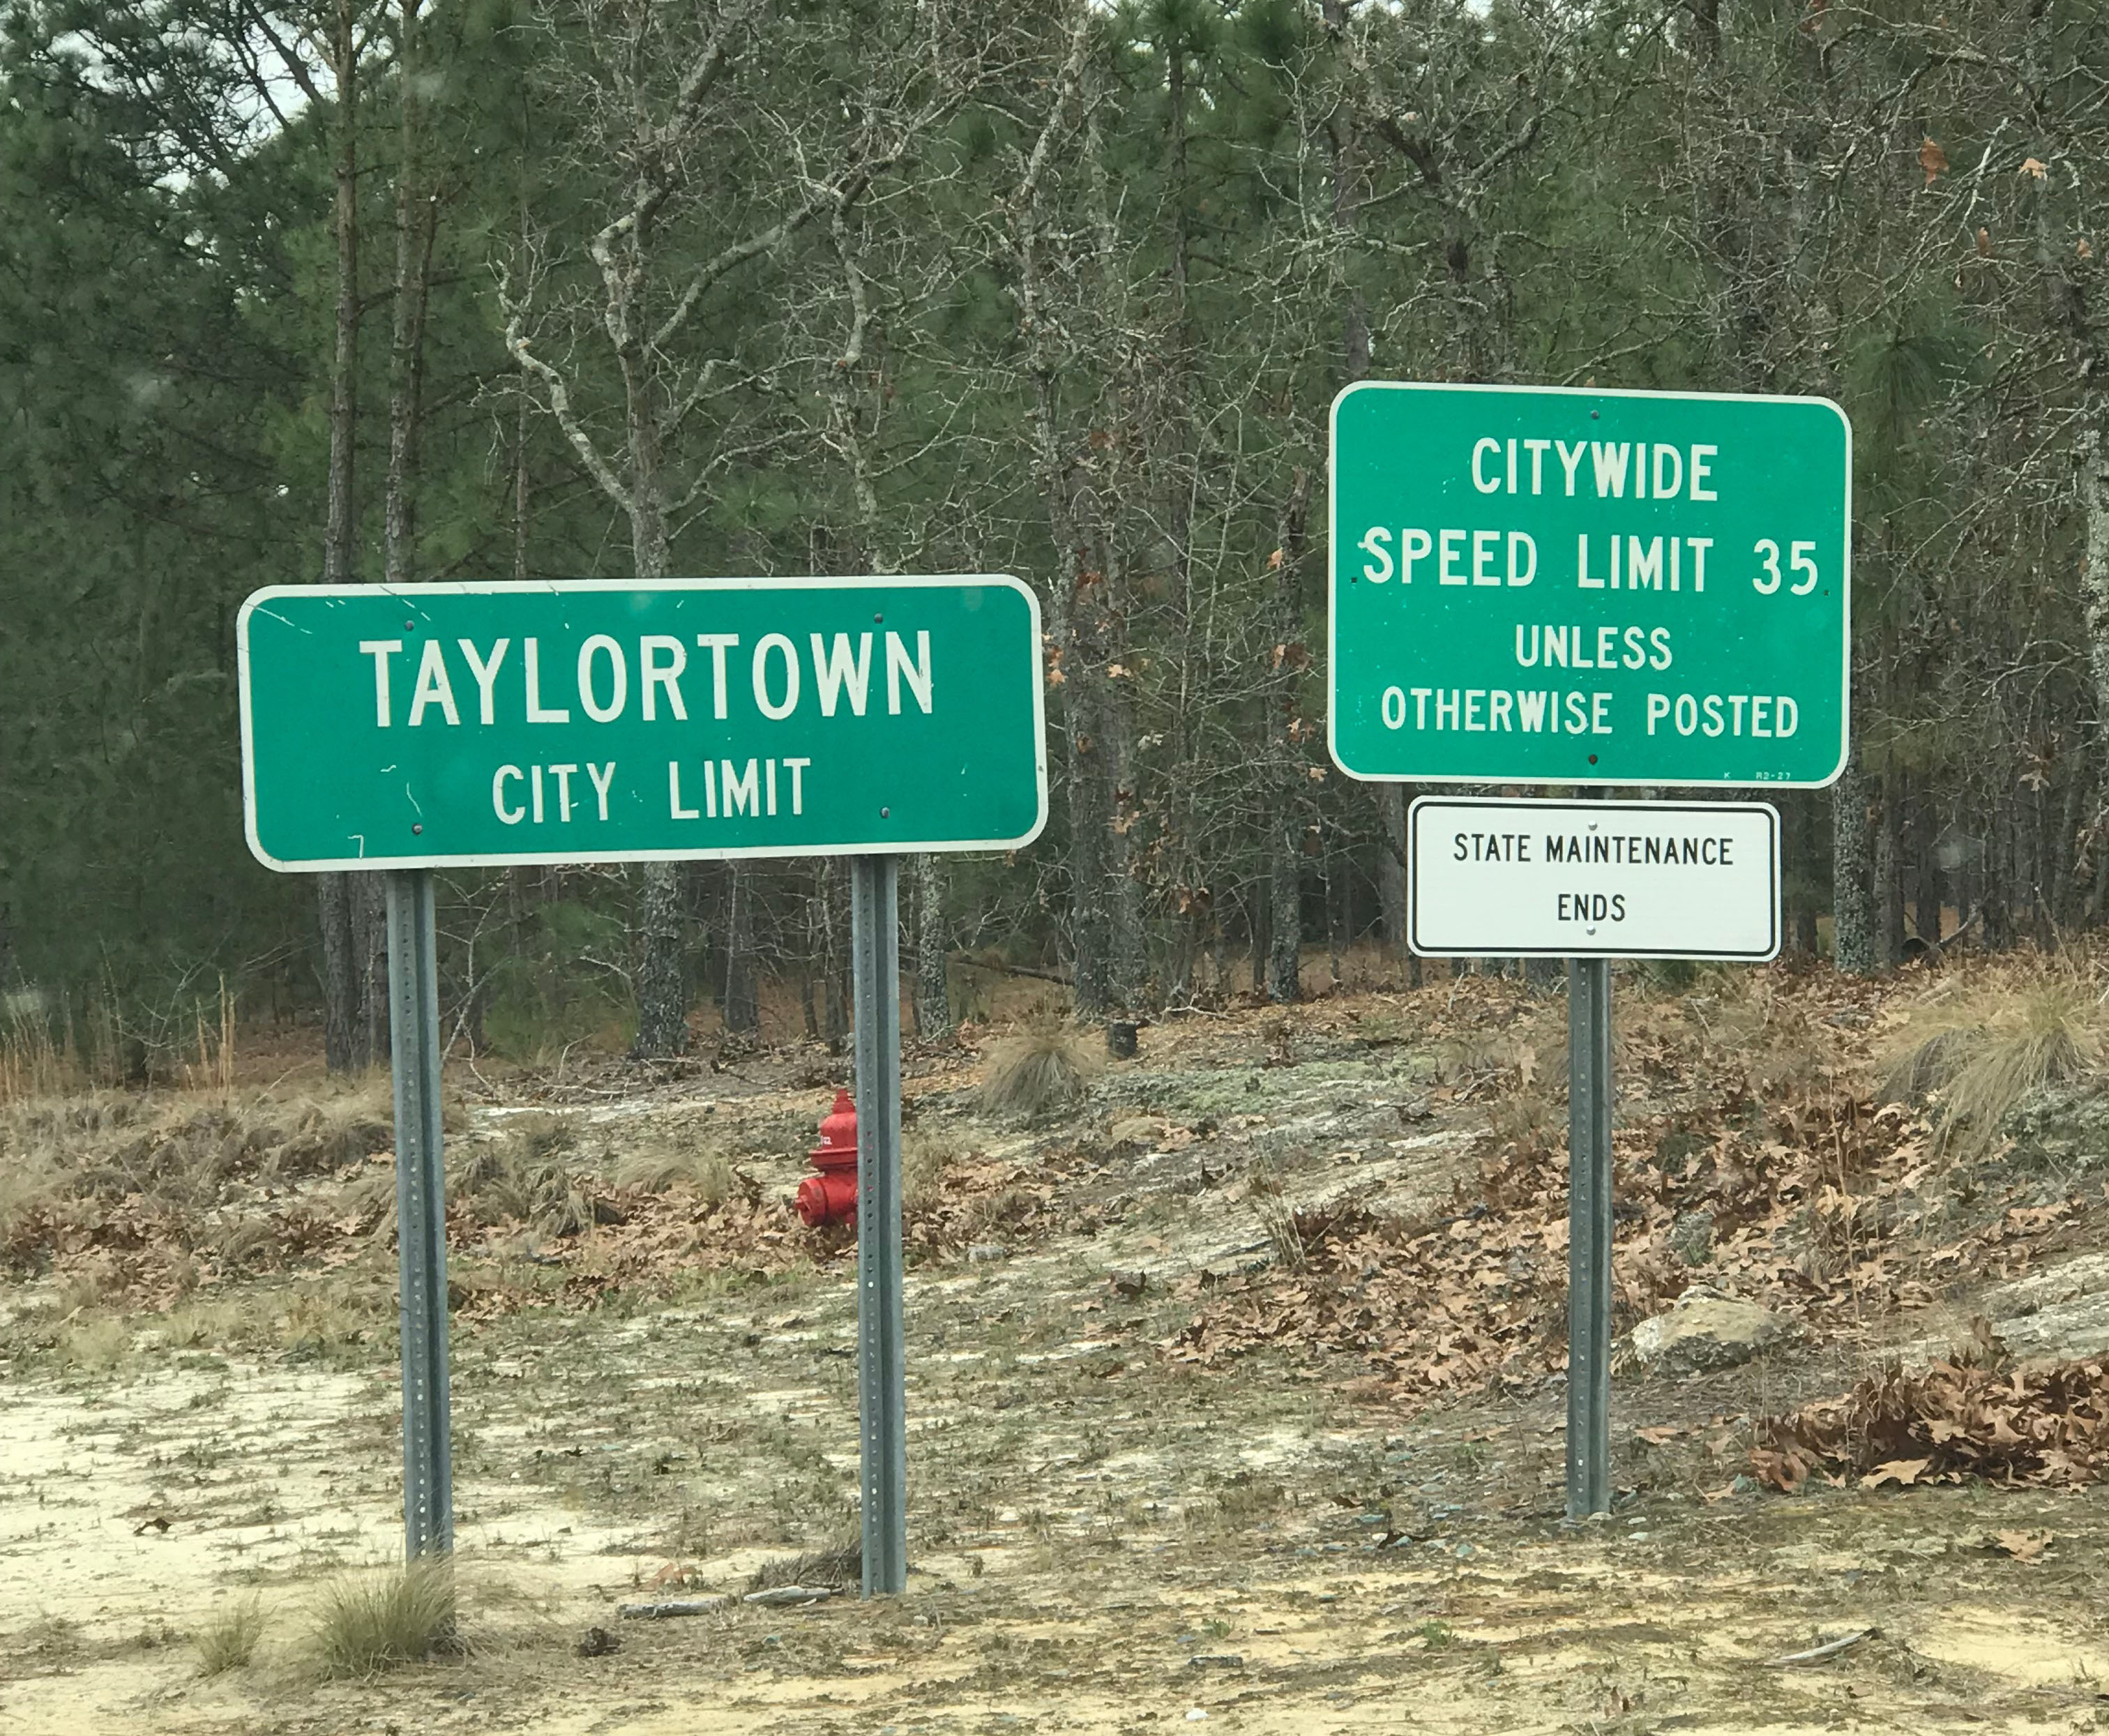 Two signs are shown along the side of the highway. One reads "Taylortown, City Limit" and the other reads "Citywide Speed Limit 35; Unless Otherwise Posted; State Maintenance Ends"